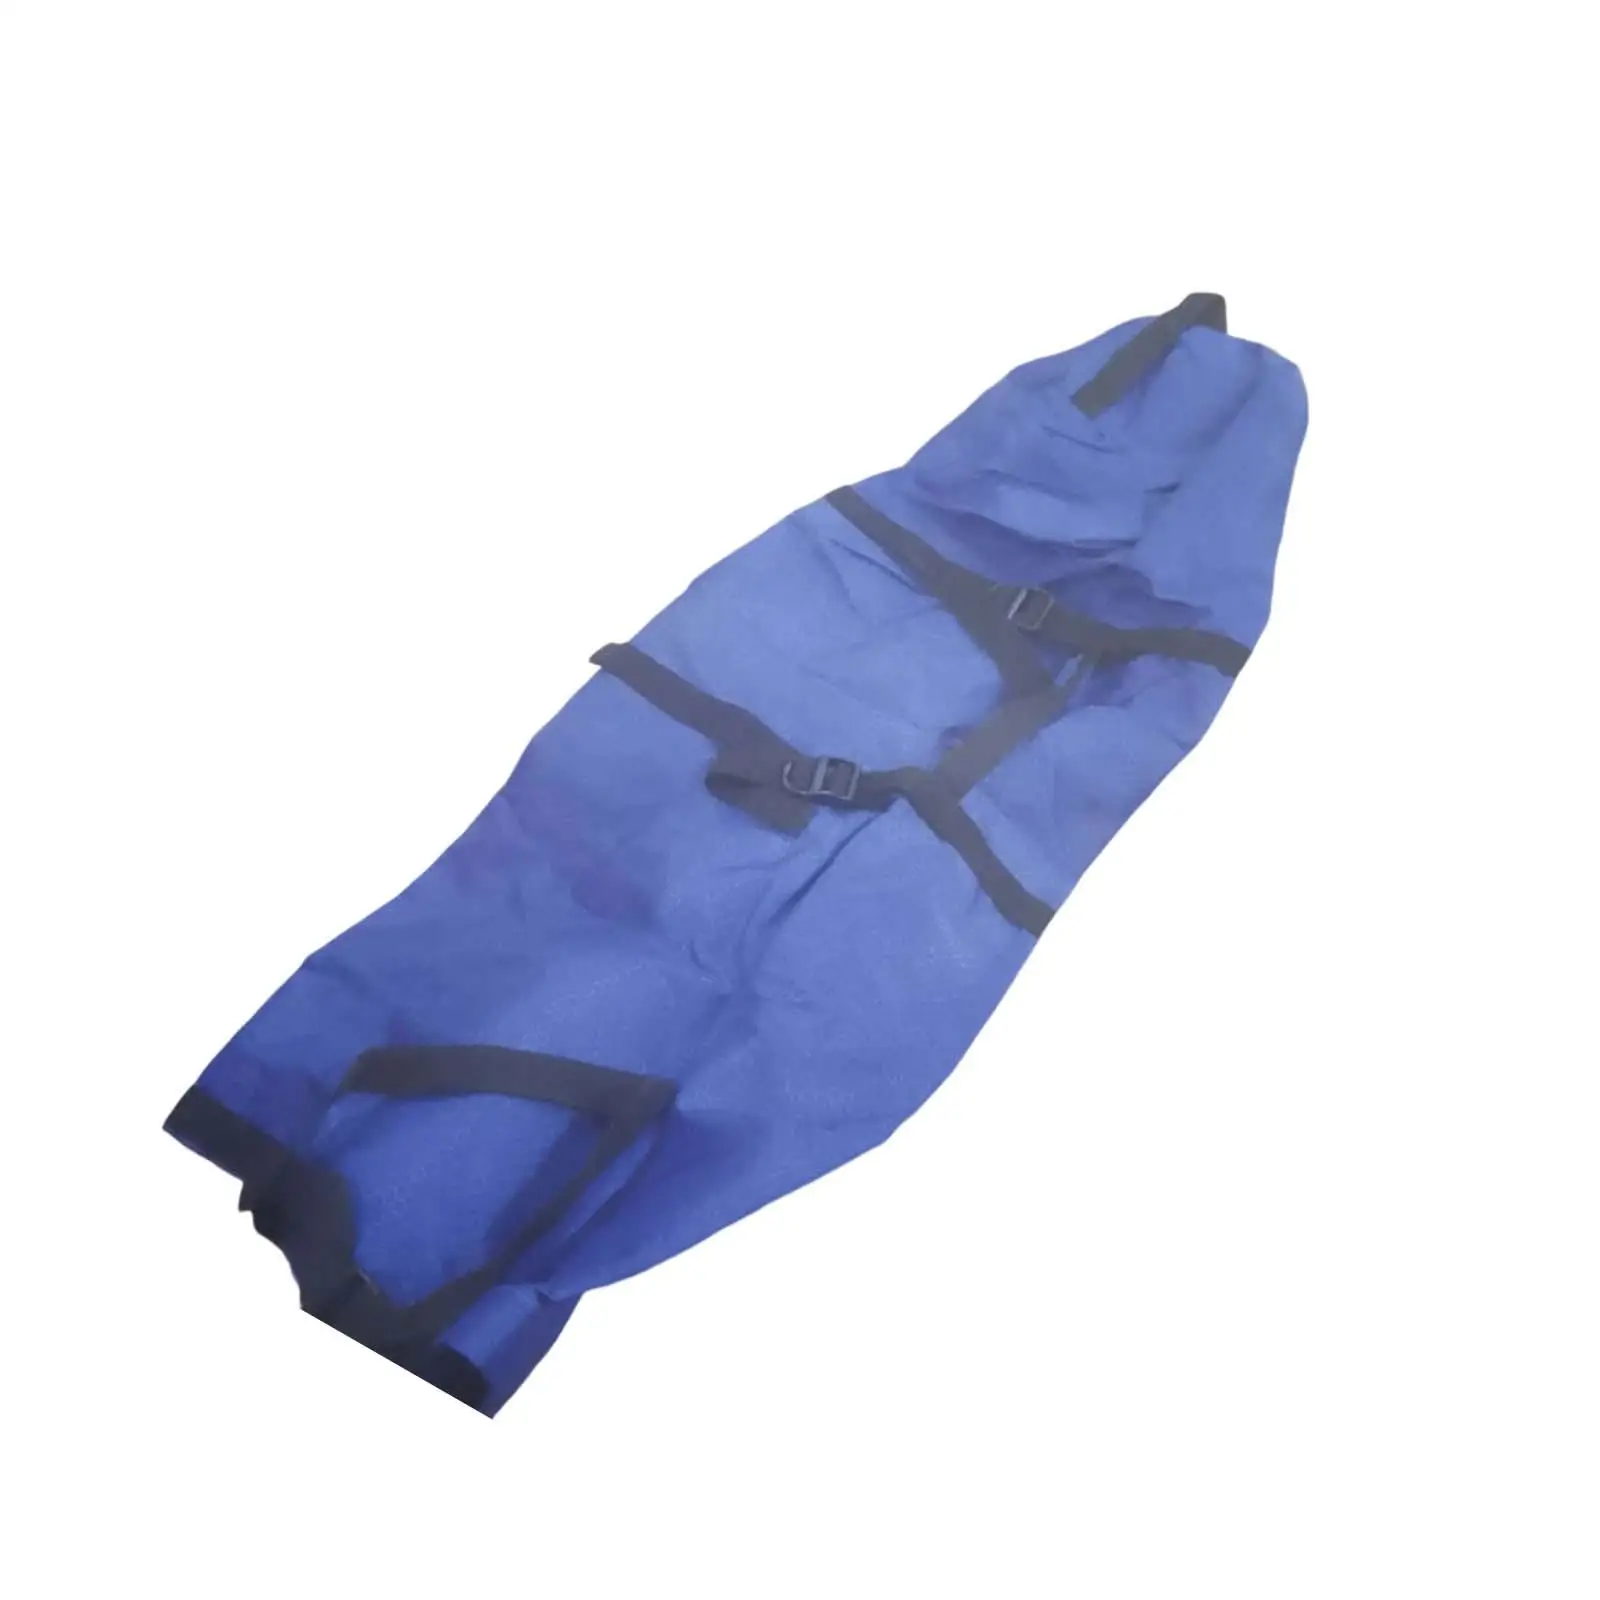 Large Tent Storage Bag, Waterproof Foldable Compression Sack Canopies Organizer, Camping Hiking Travel Dufel Bags